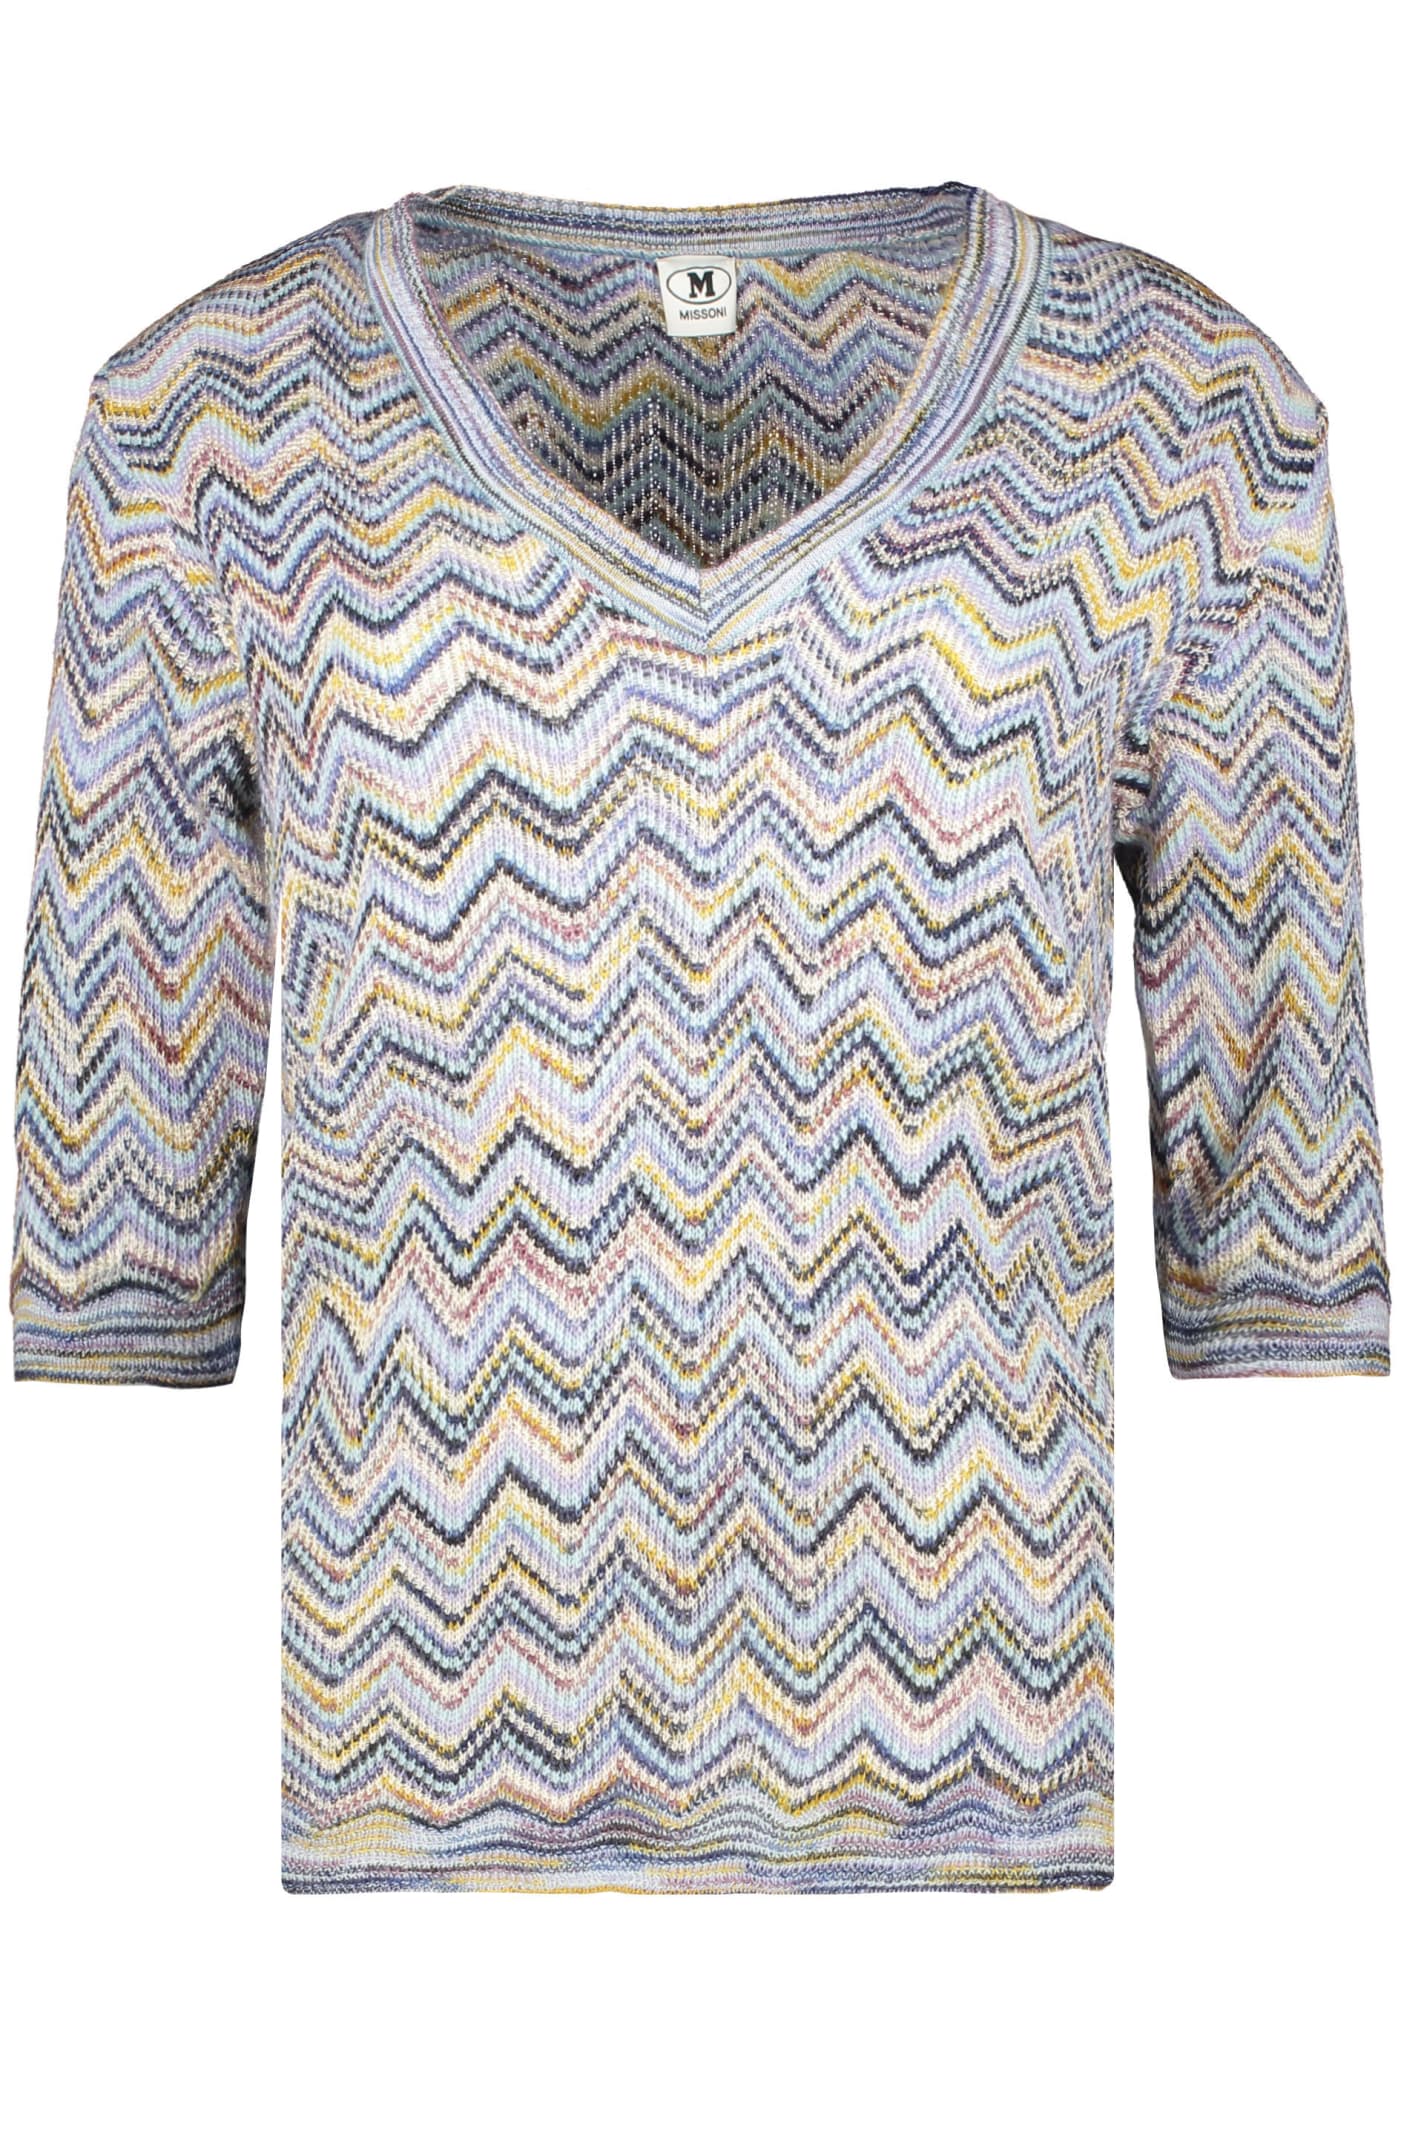 M Missoni Sweater With V-neck In Blue